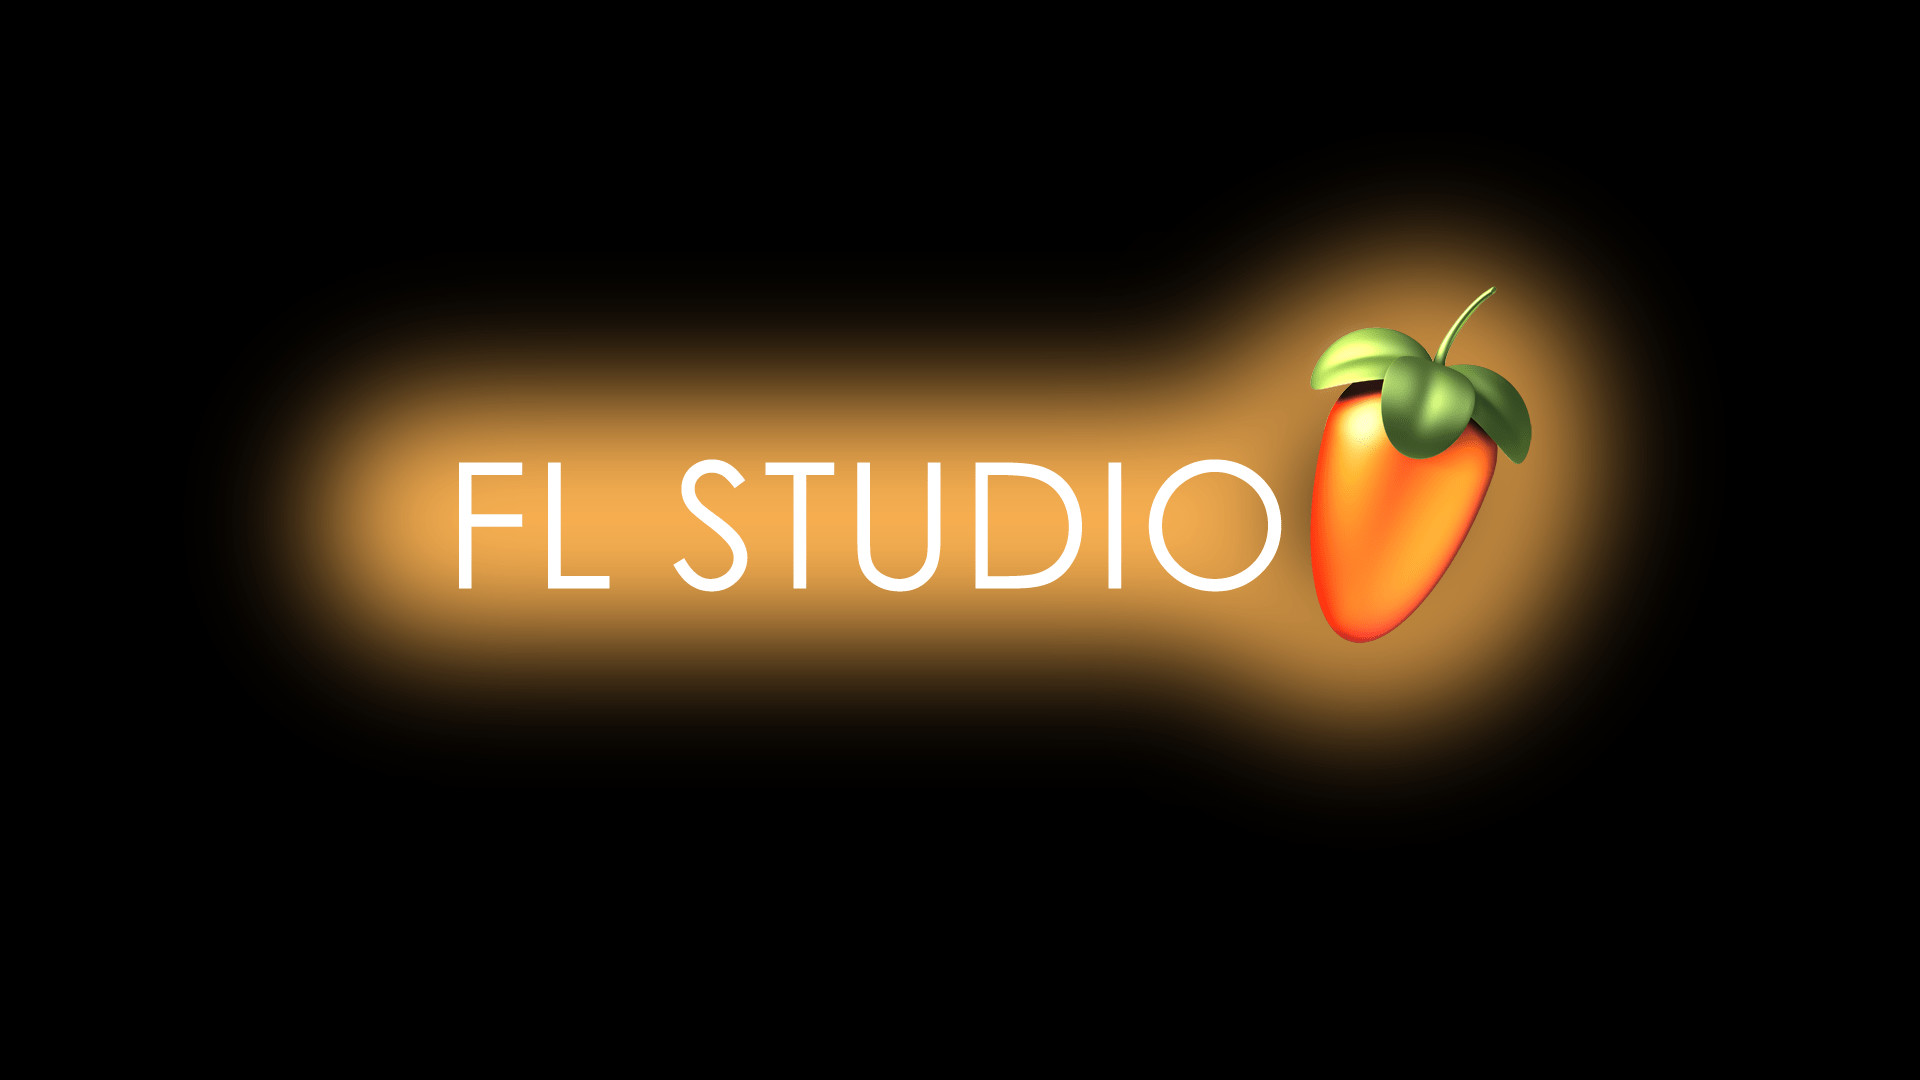 FL Studio Wallpapers and Backgrounds (77+ images).